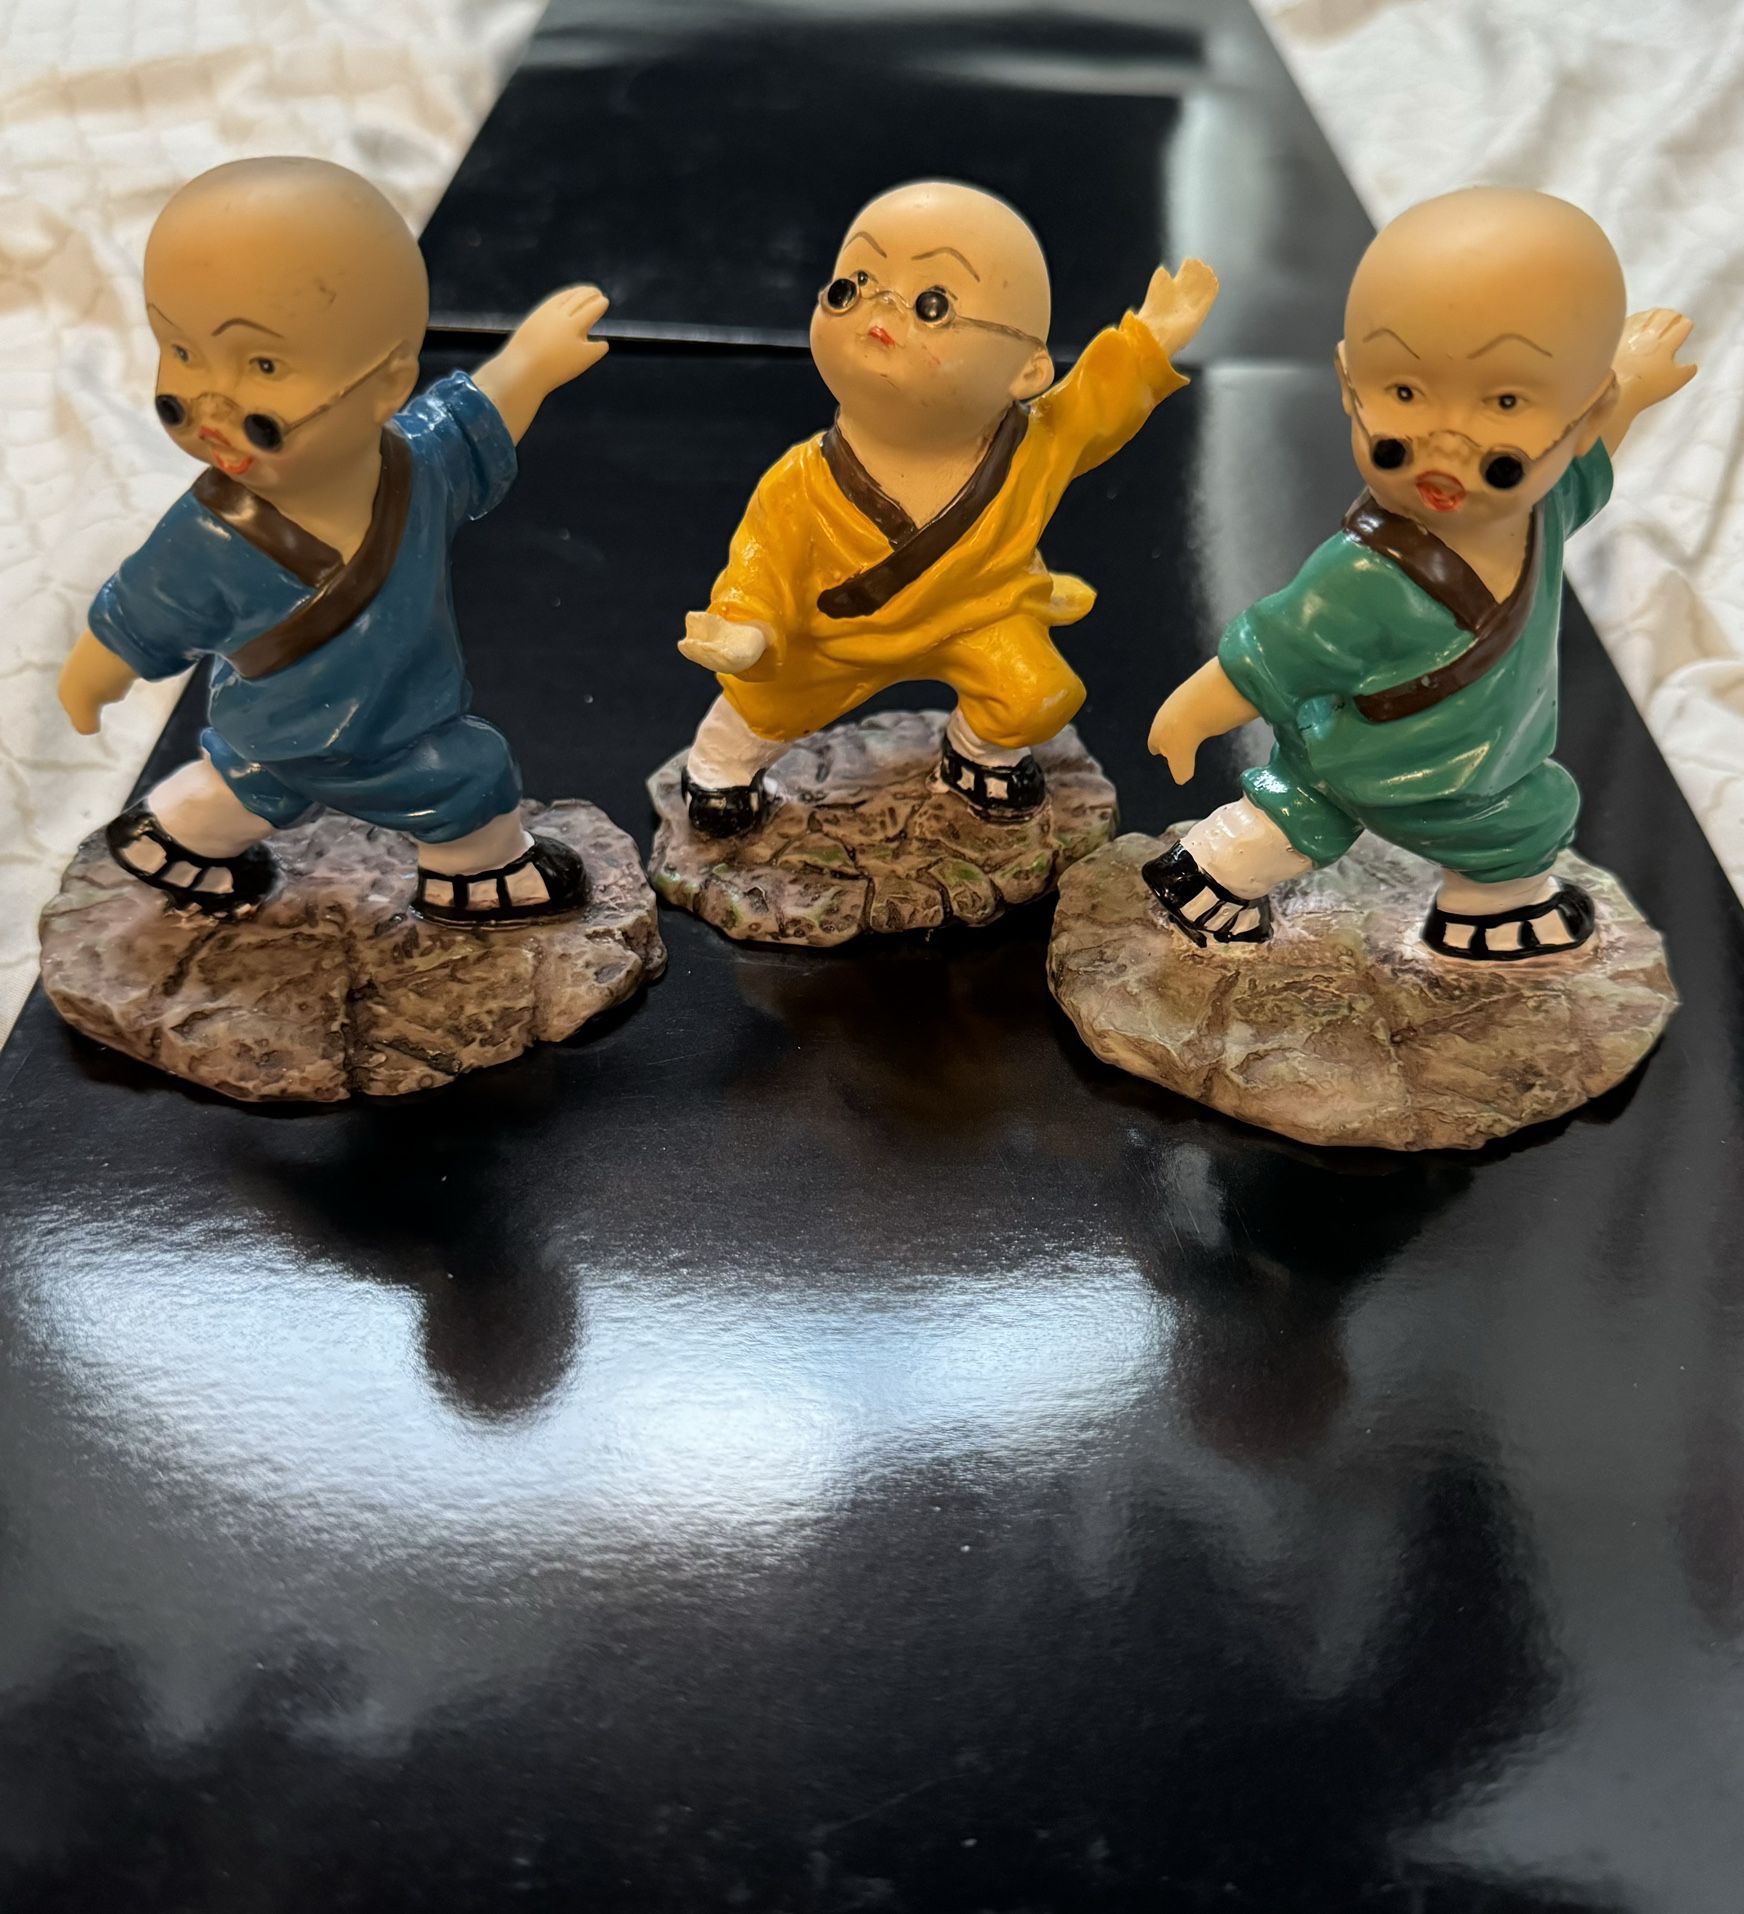 Brand New Buddha Monk Baby Statue Figurine Stance 4” - 5” inches $6 Each !!!ACCEPTING OFFERS!!!